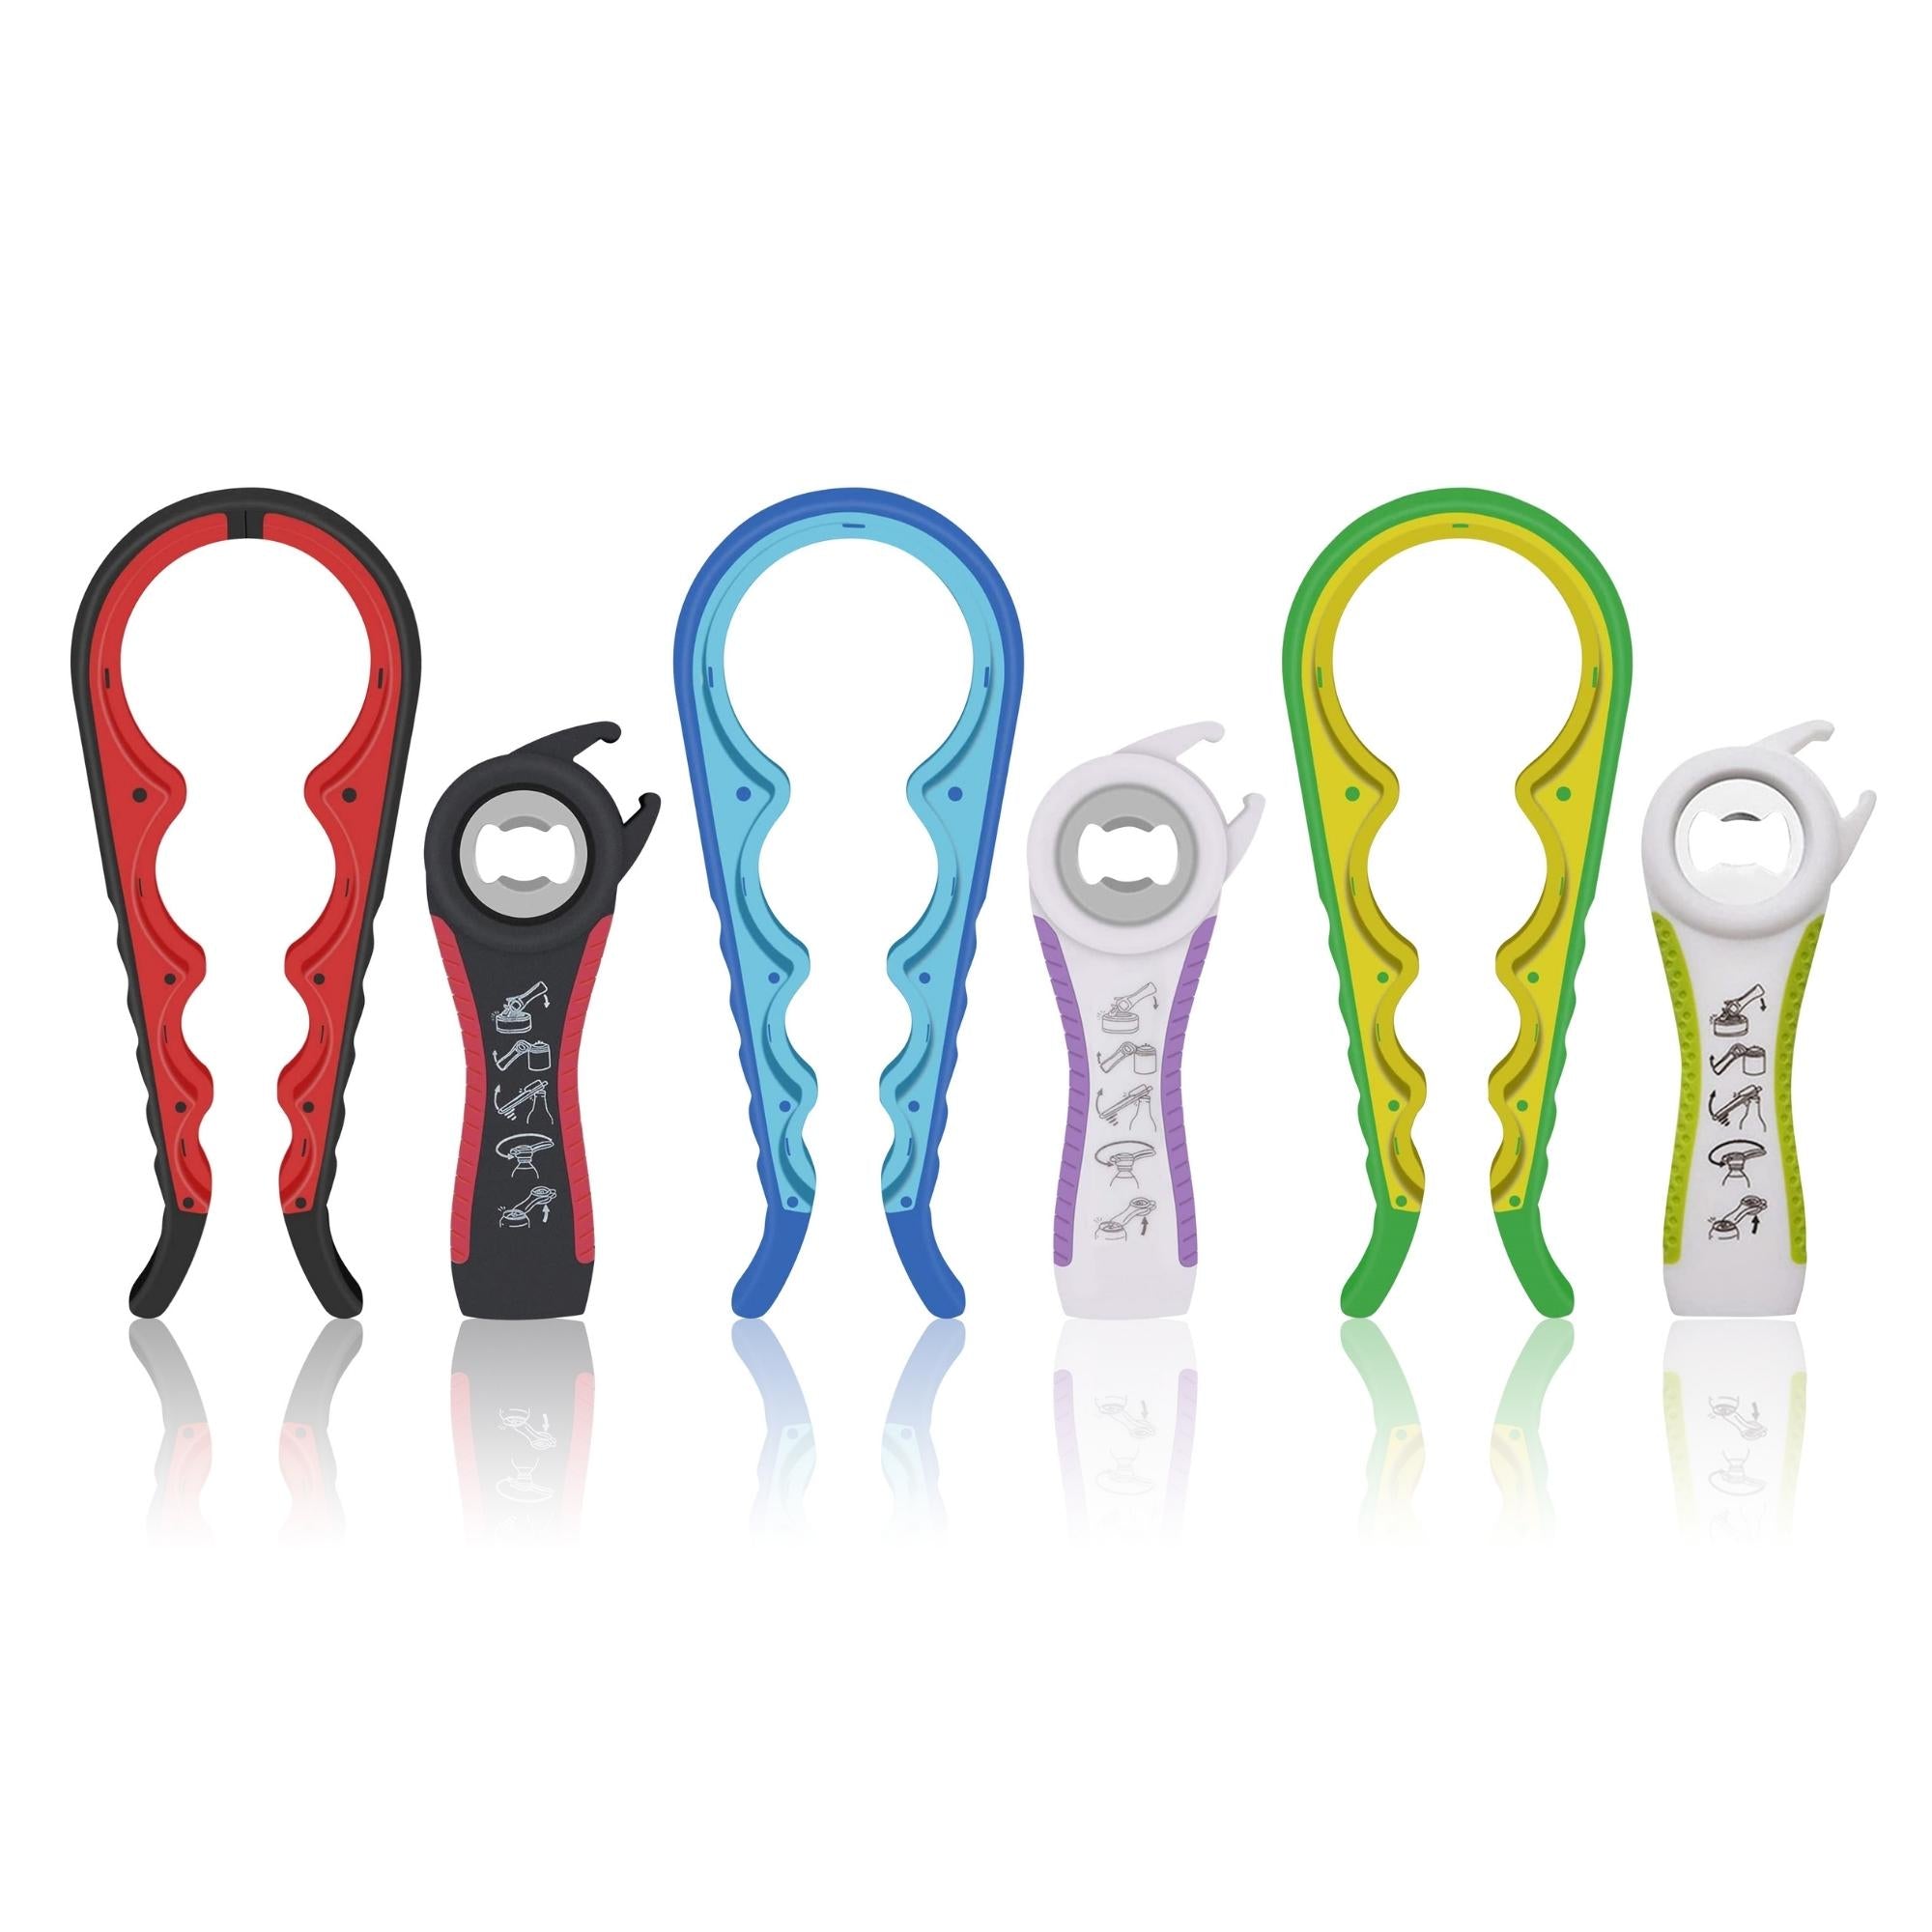 5 in 1 Multi Function Can and Jar Opener Bottle Opener Kit with Silicone Handle